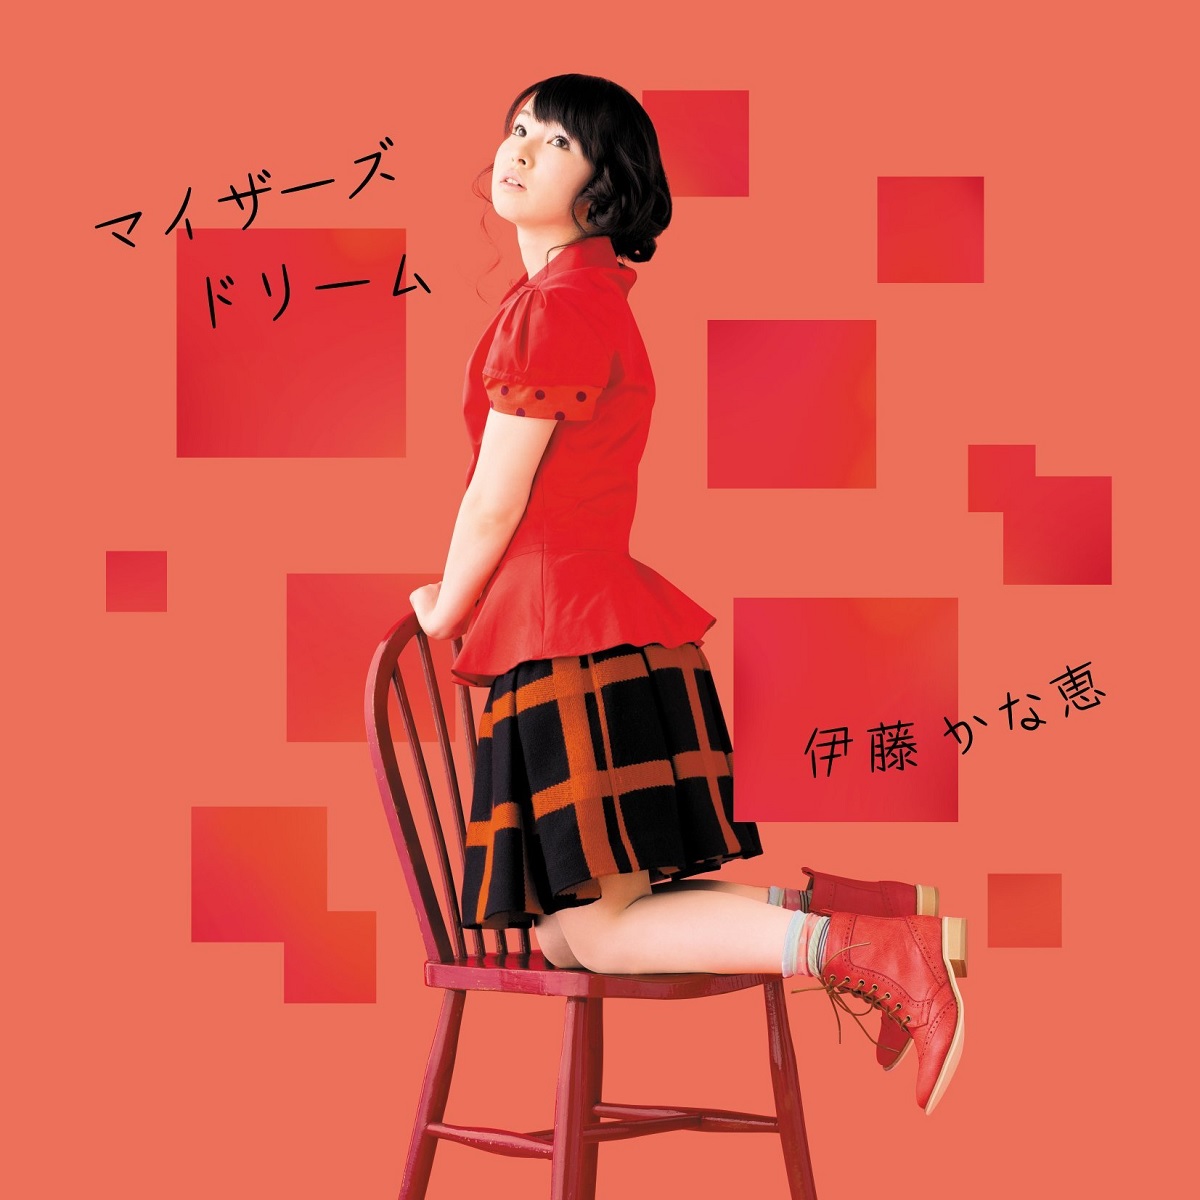 Cover art for『Kanae Ito - Miser's Dream』from the release『マイザーズドリーム』